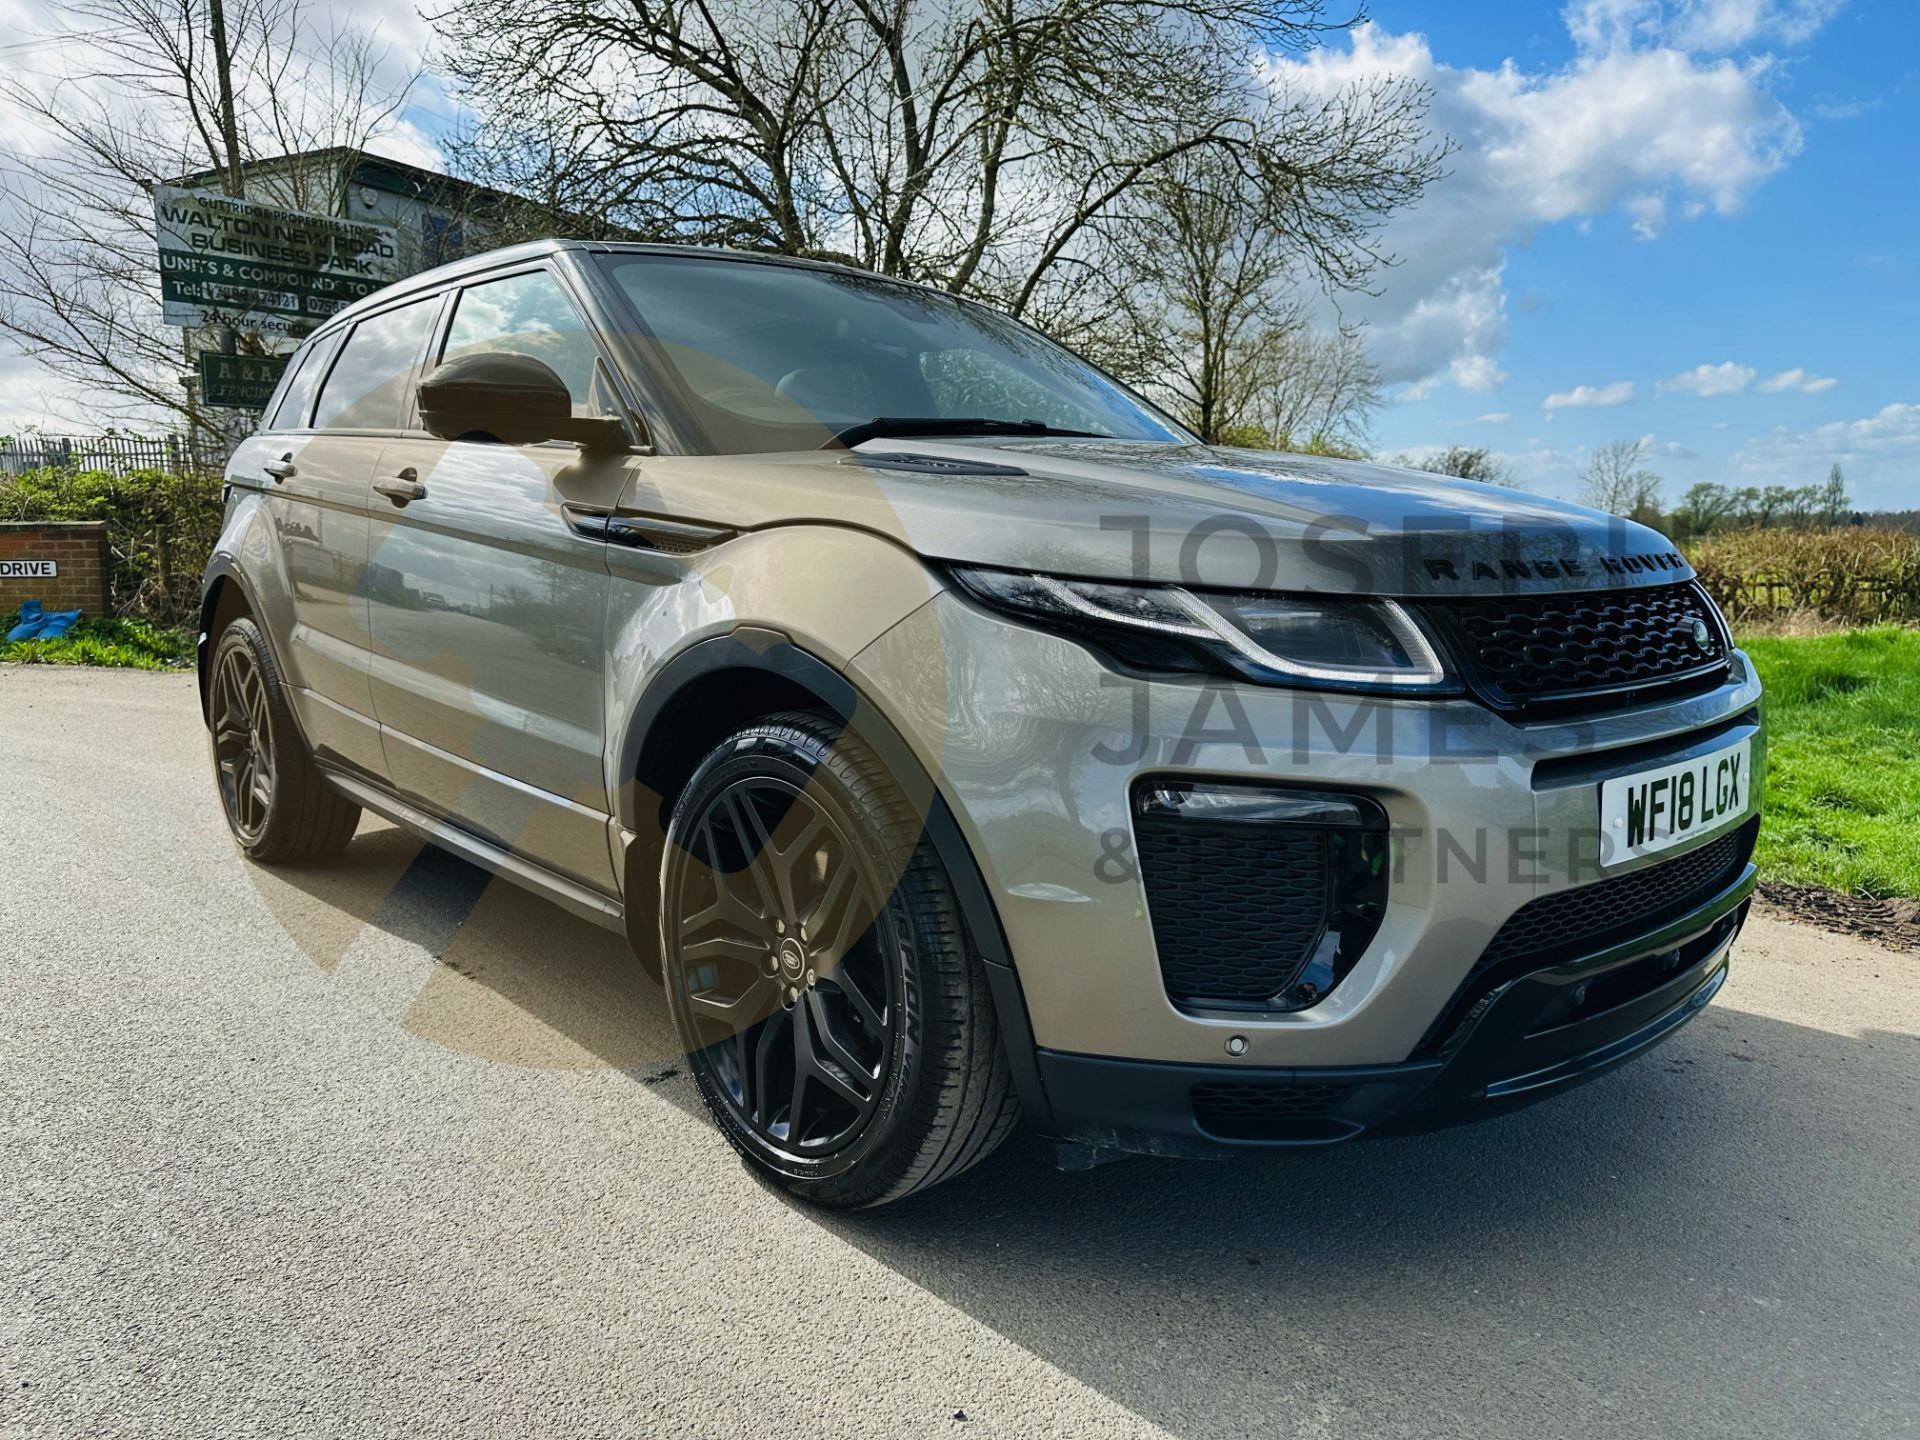 (On Sale) RANGE ROVER EVOQUE *HSE DYNAMIC* SUV (2018 - EURO 6) 2.0 SD4 - AUTOMATIC *ULTIMATE SPEC* - Image 2 of 48